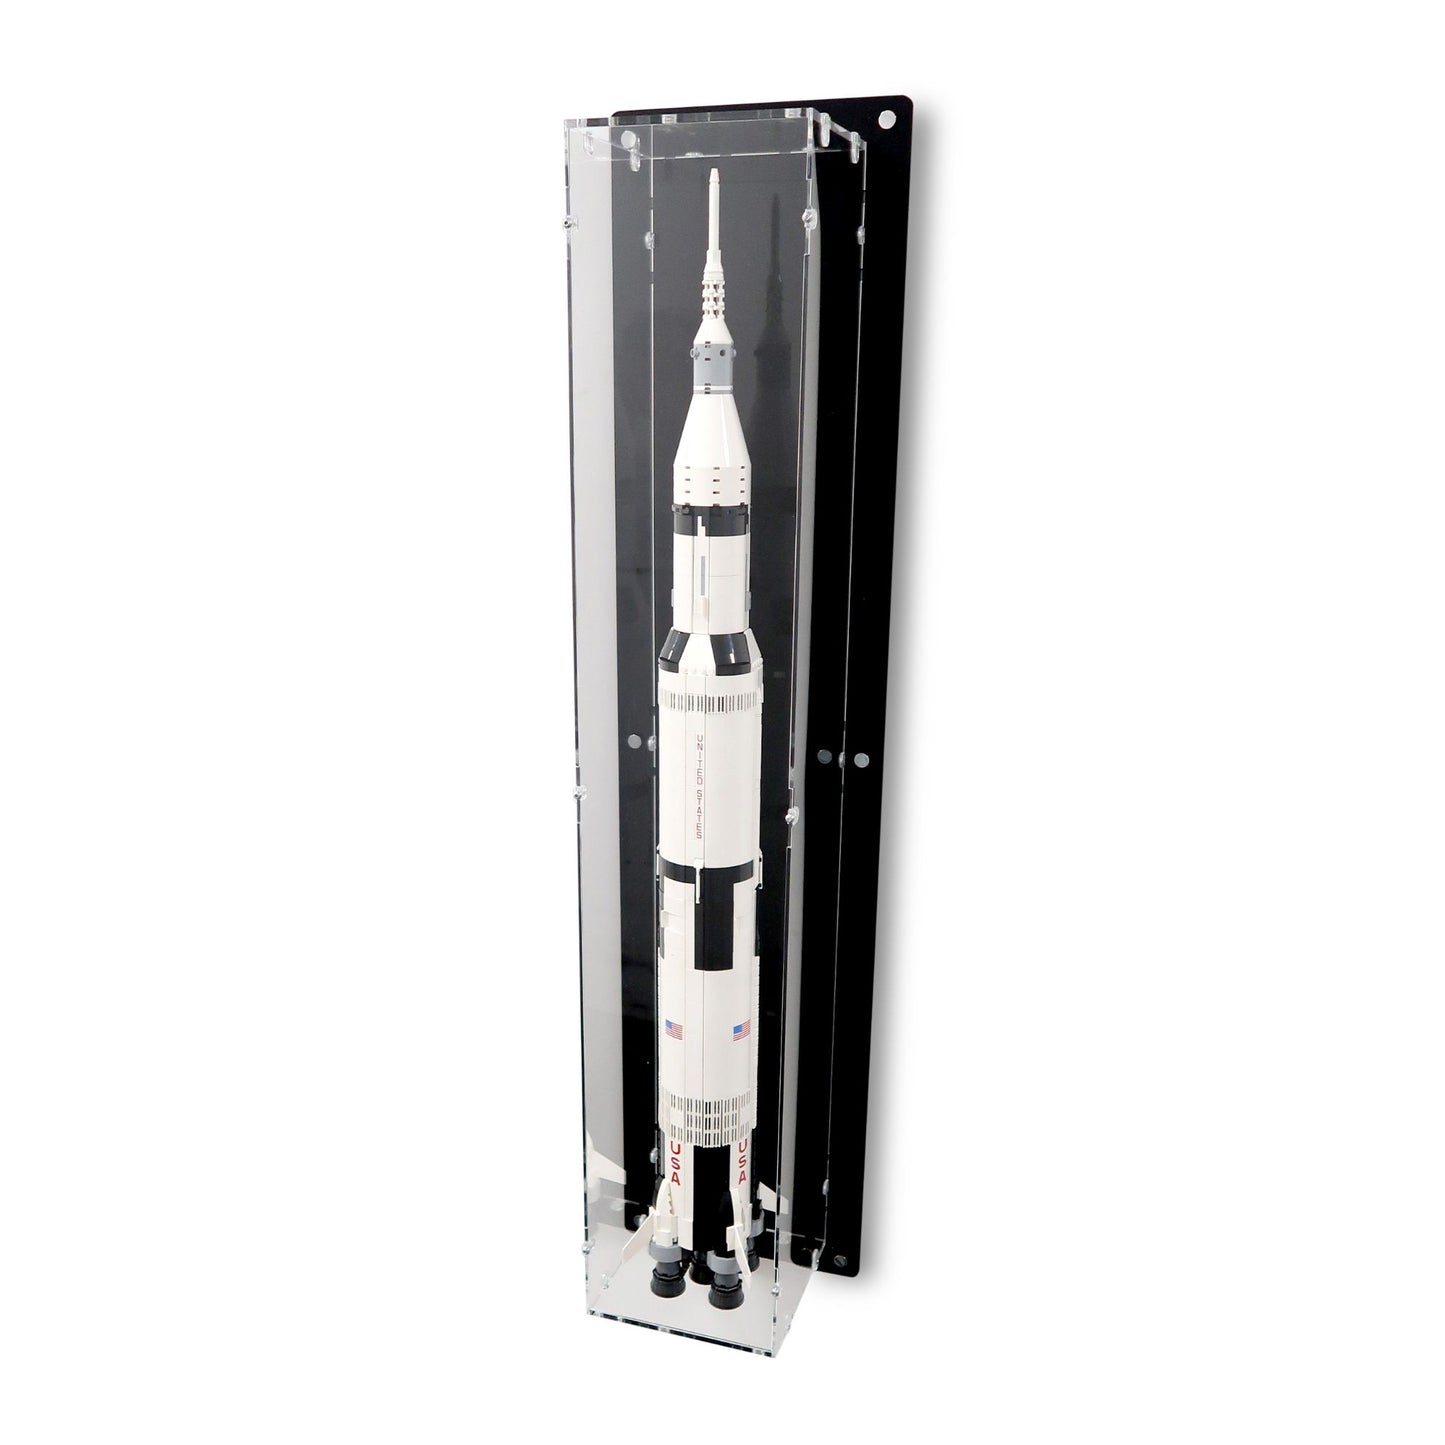 3 in 1 Wall-Mounted Case for 92176/21309 NASA Saturn V